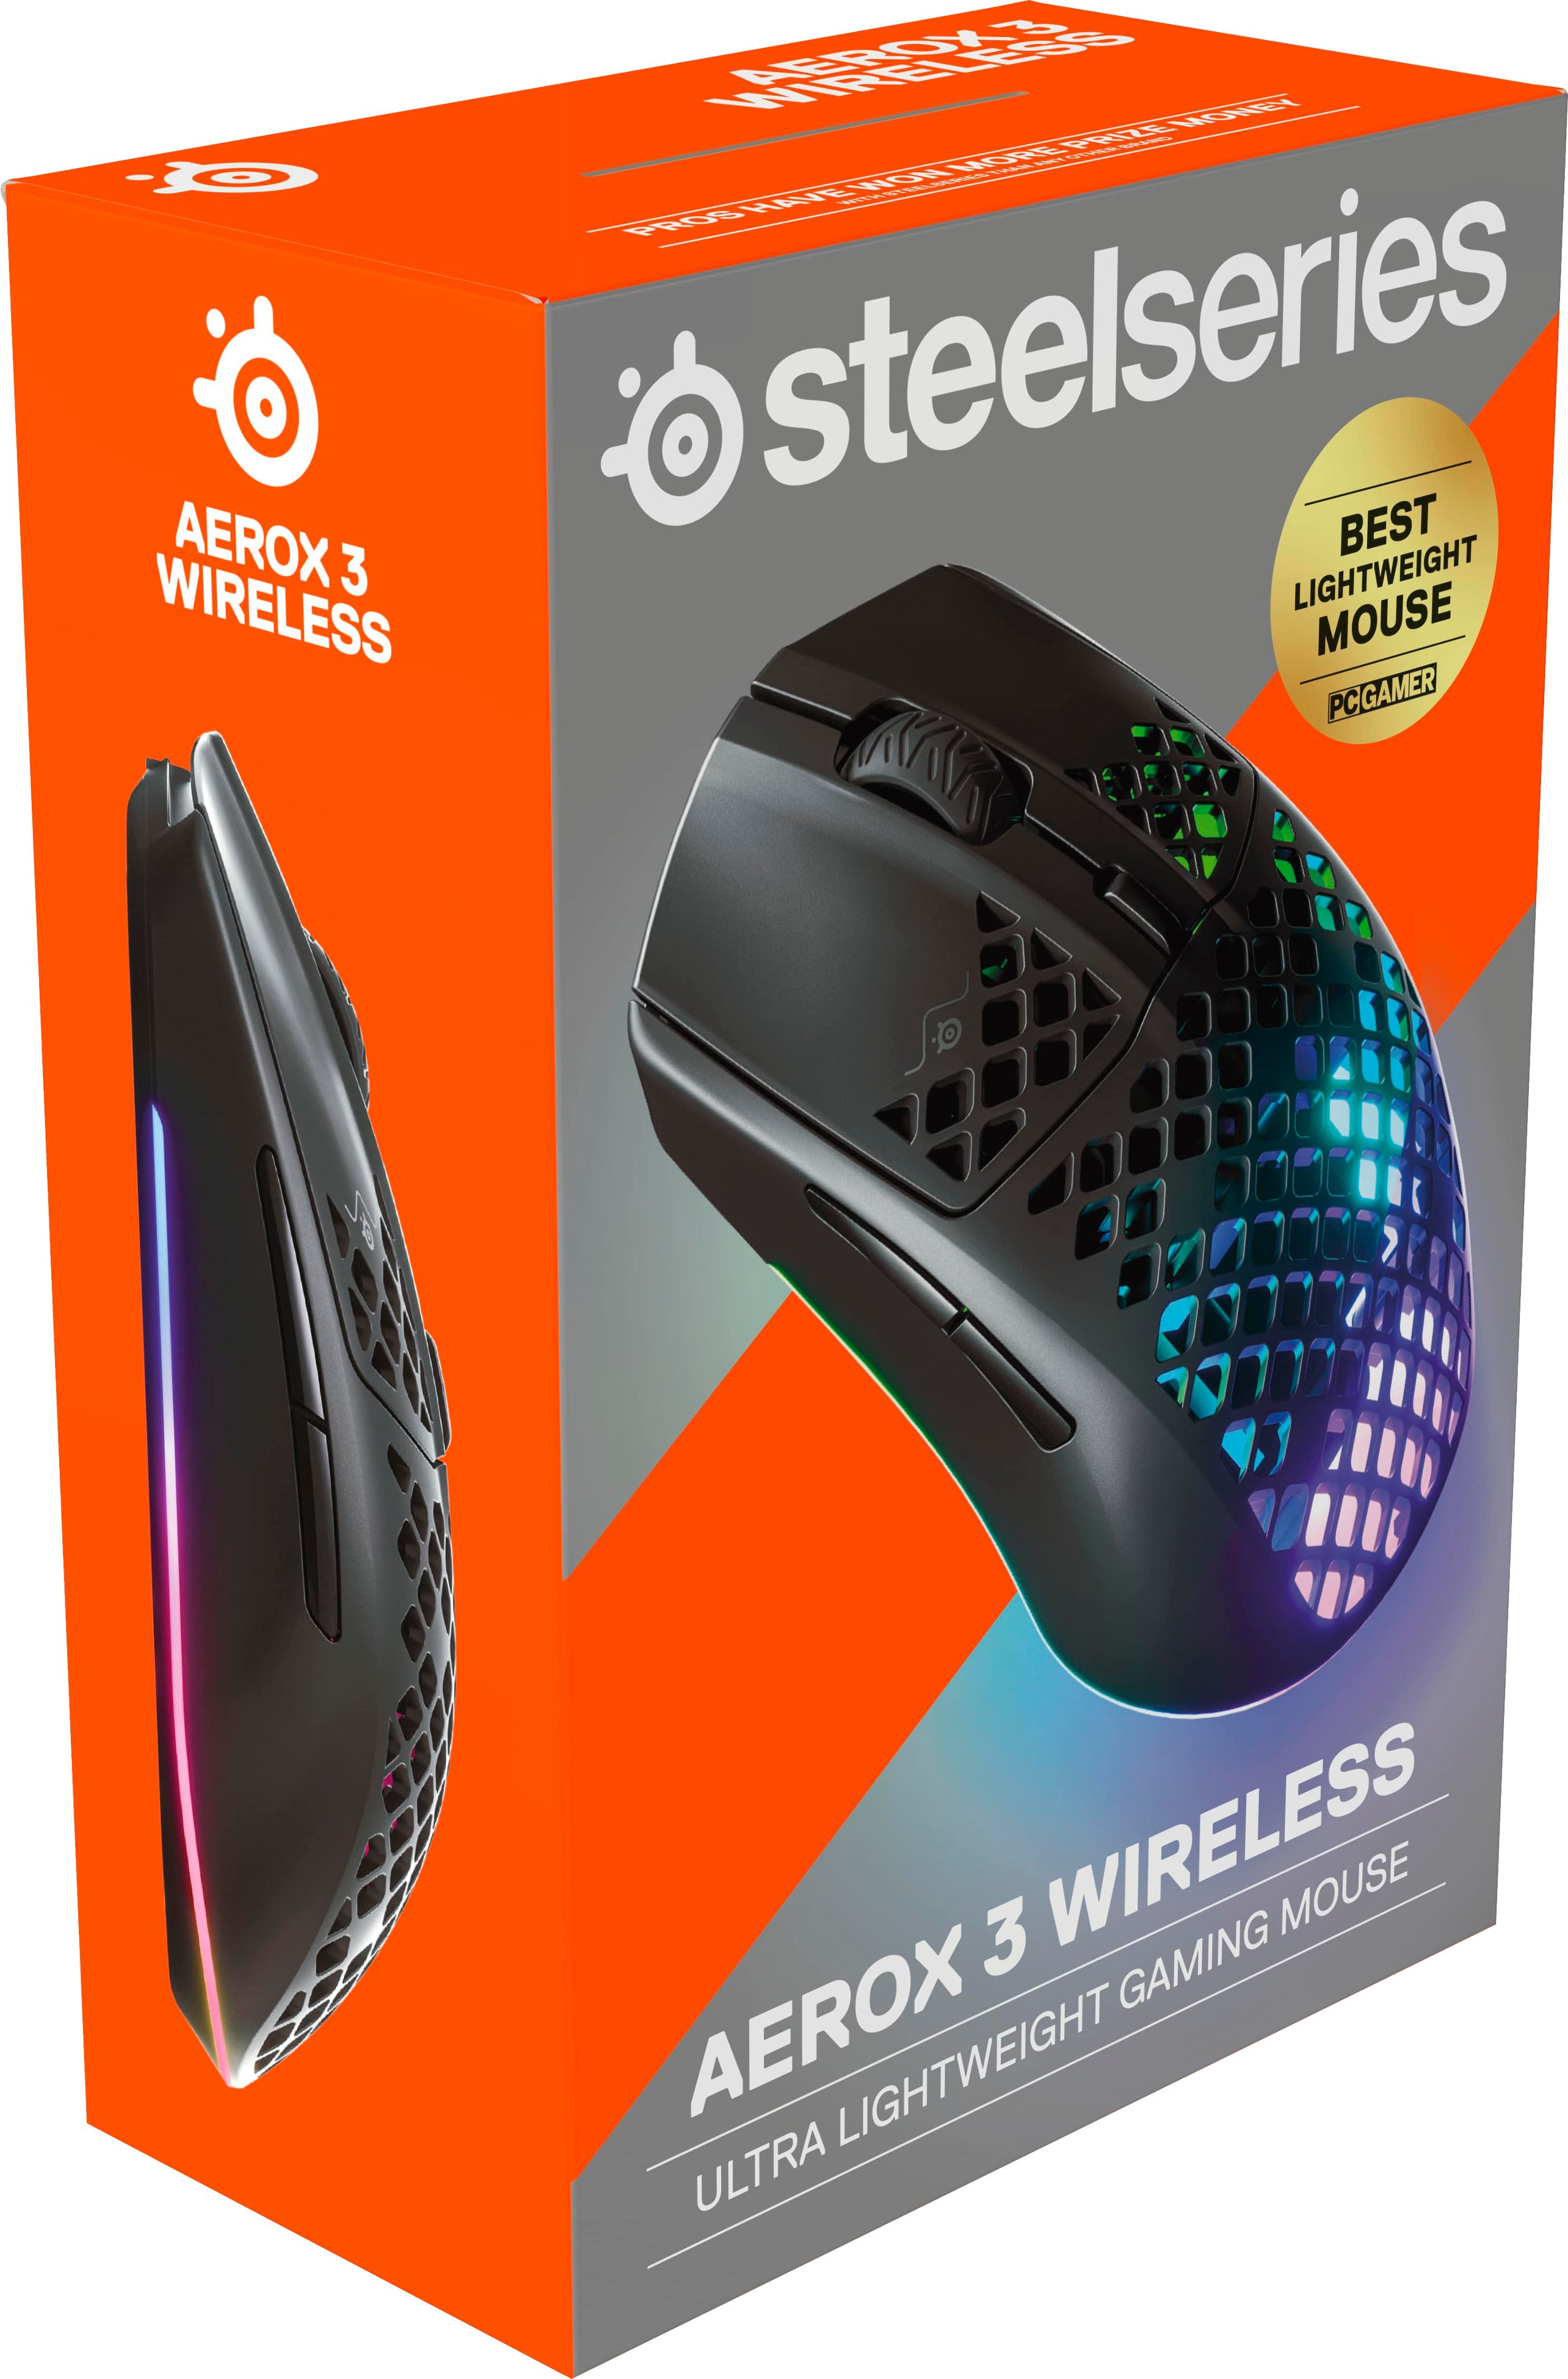 SteelSeries Aerox 3 Wireless, Bluetooth & Wired Gaming Mouse